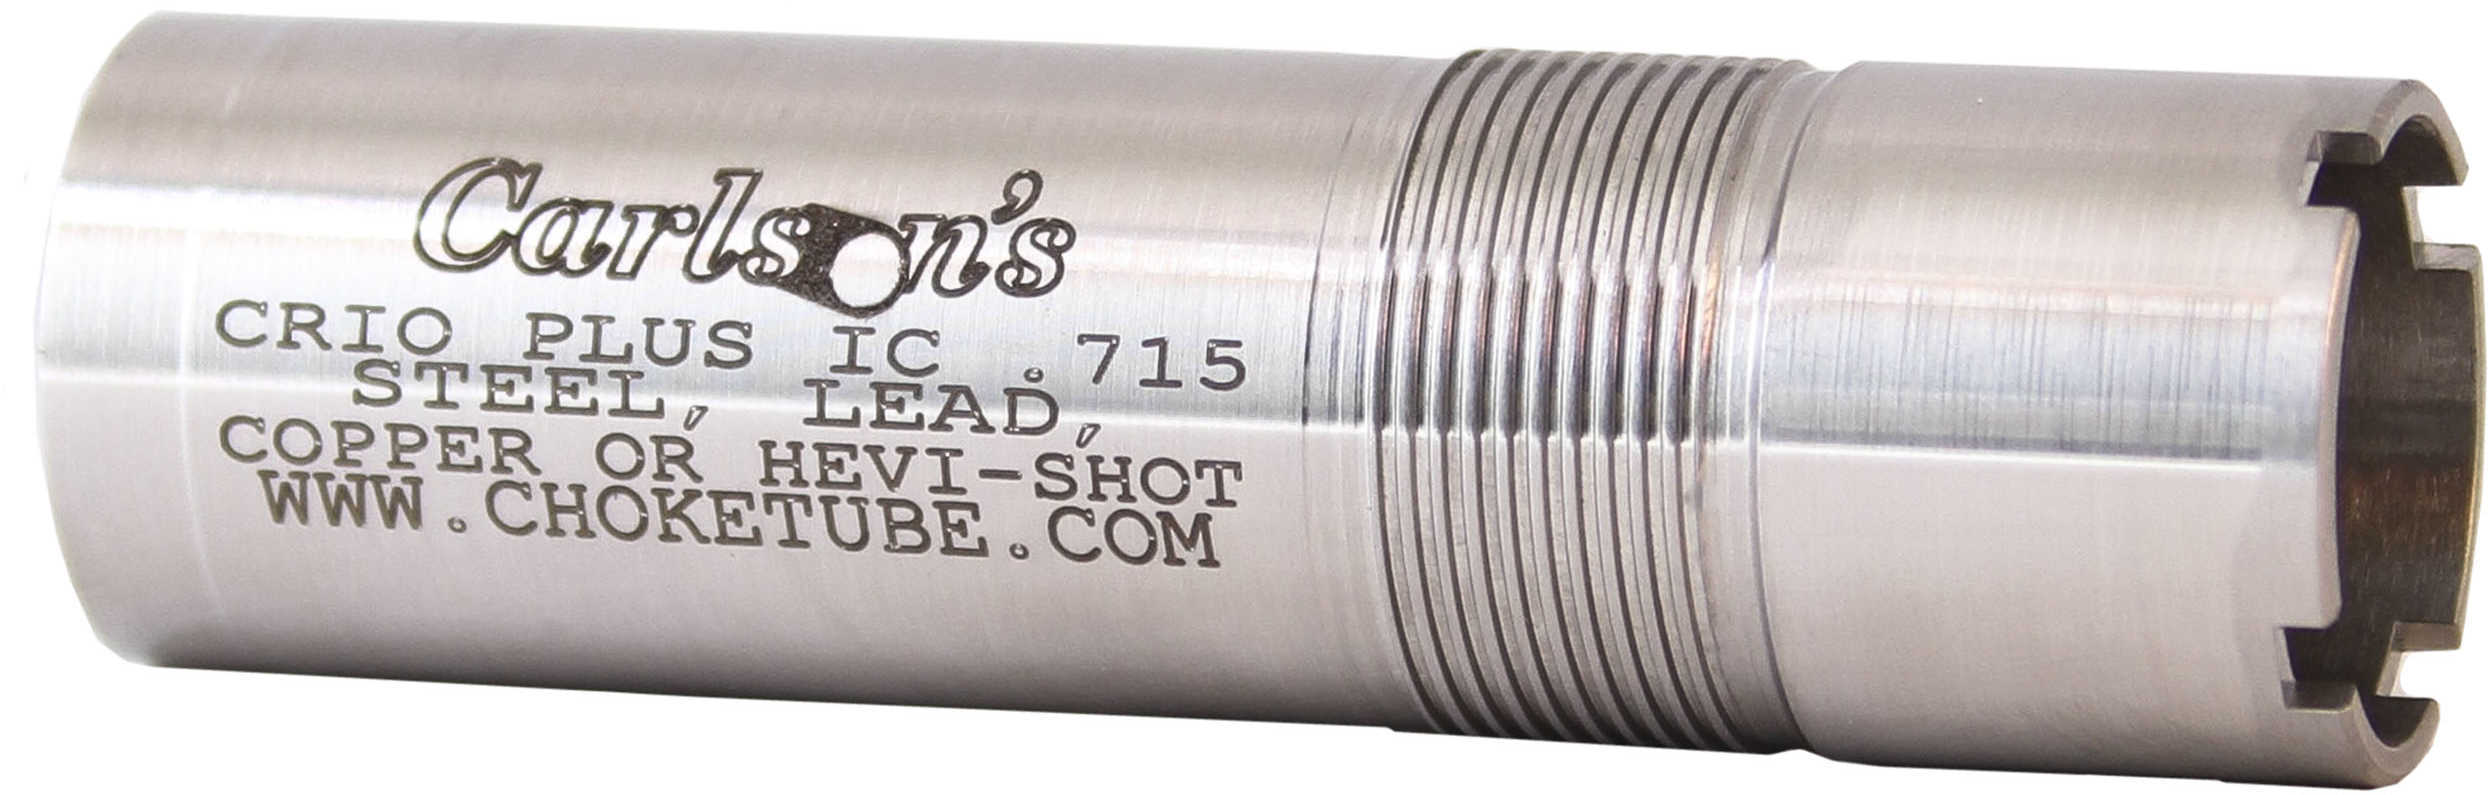 Carlsons Benelli Crio/Crio Plus Choke Tube 12 Gauge, Improved Cylinder Md: 50002